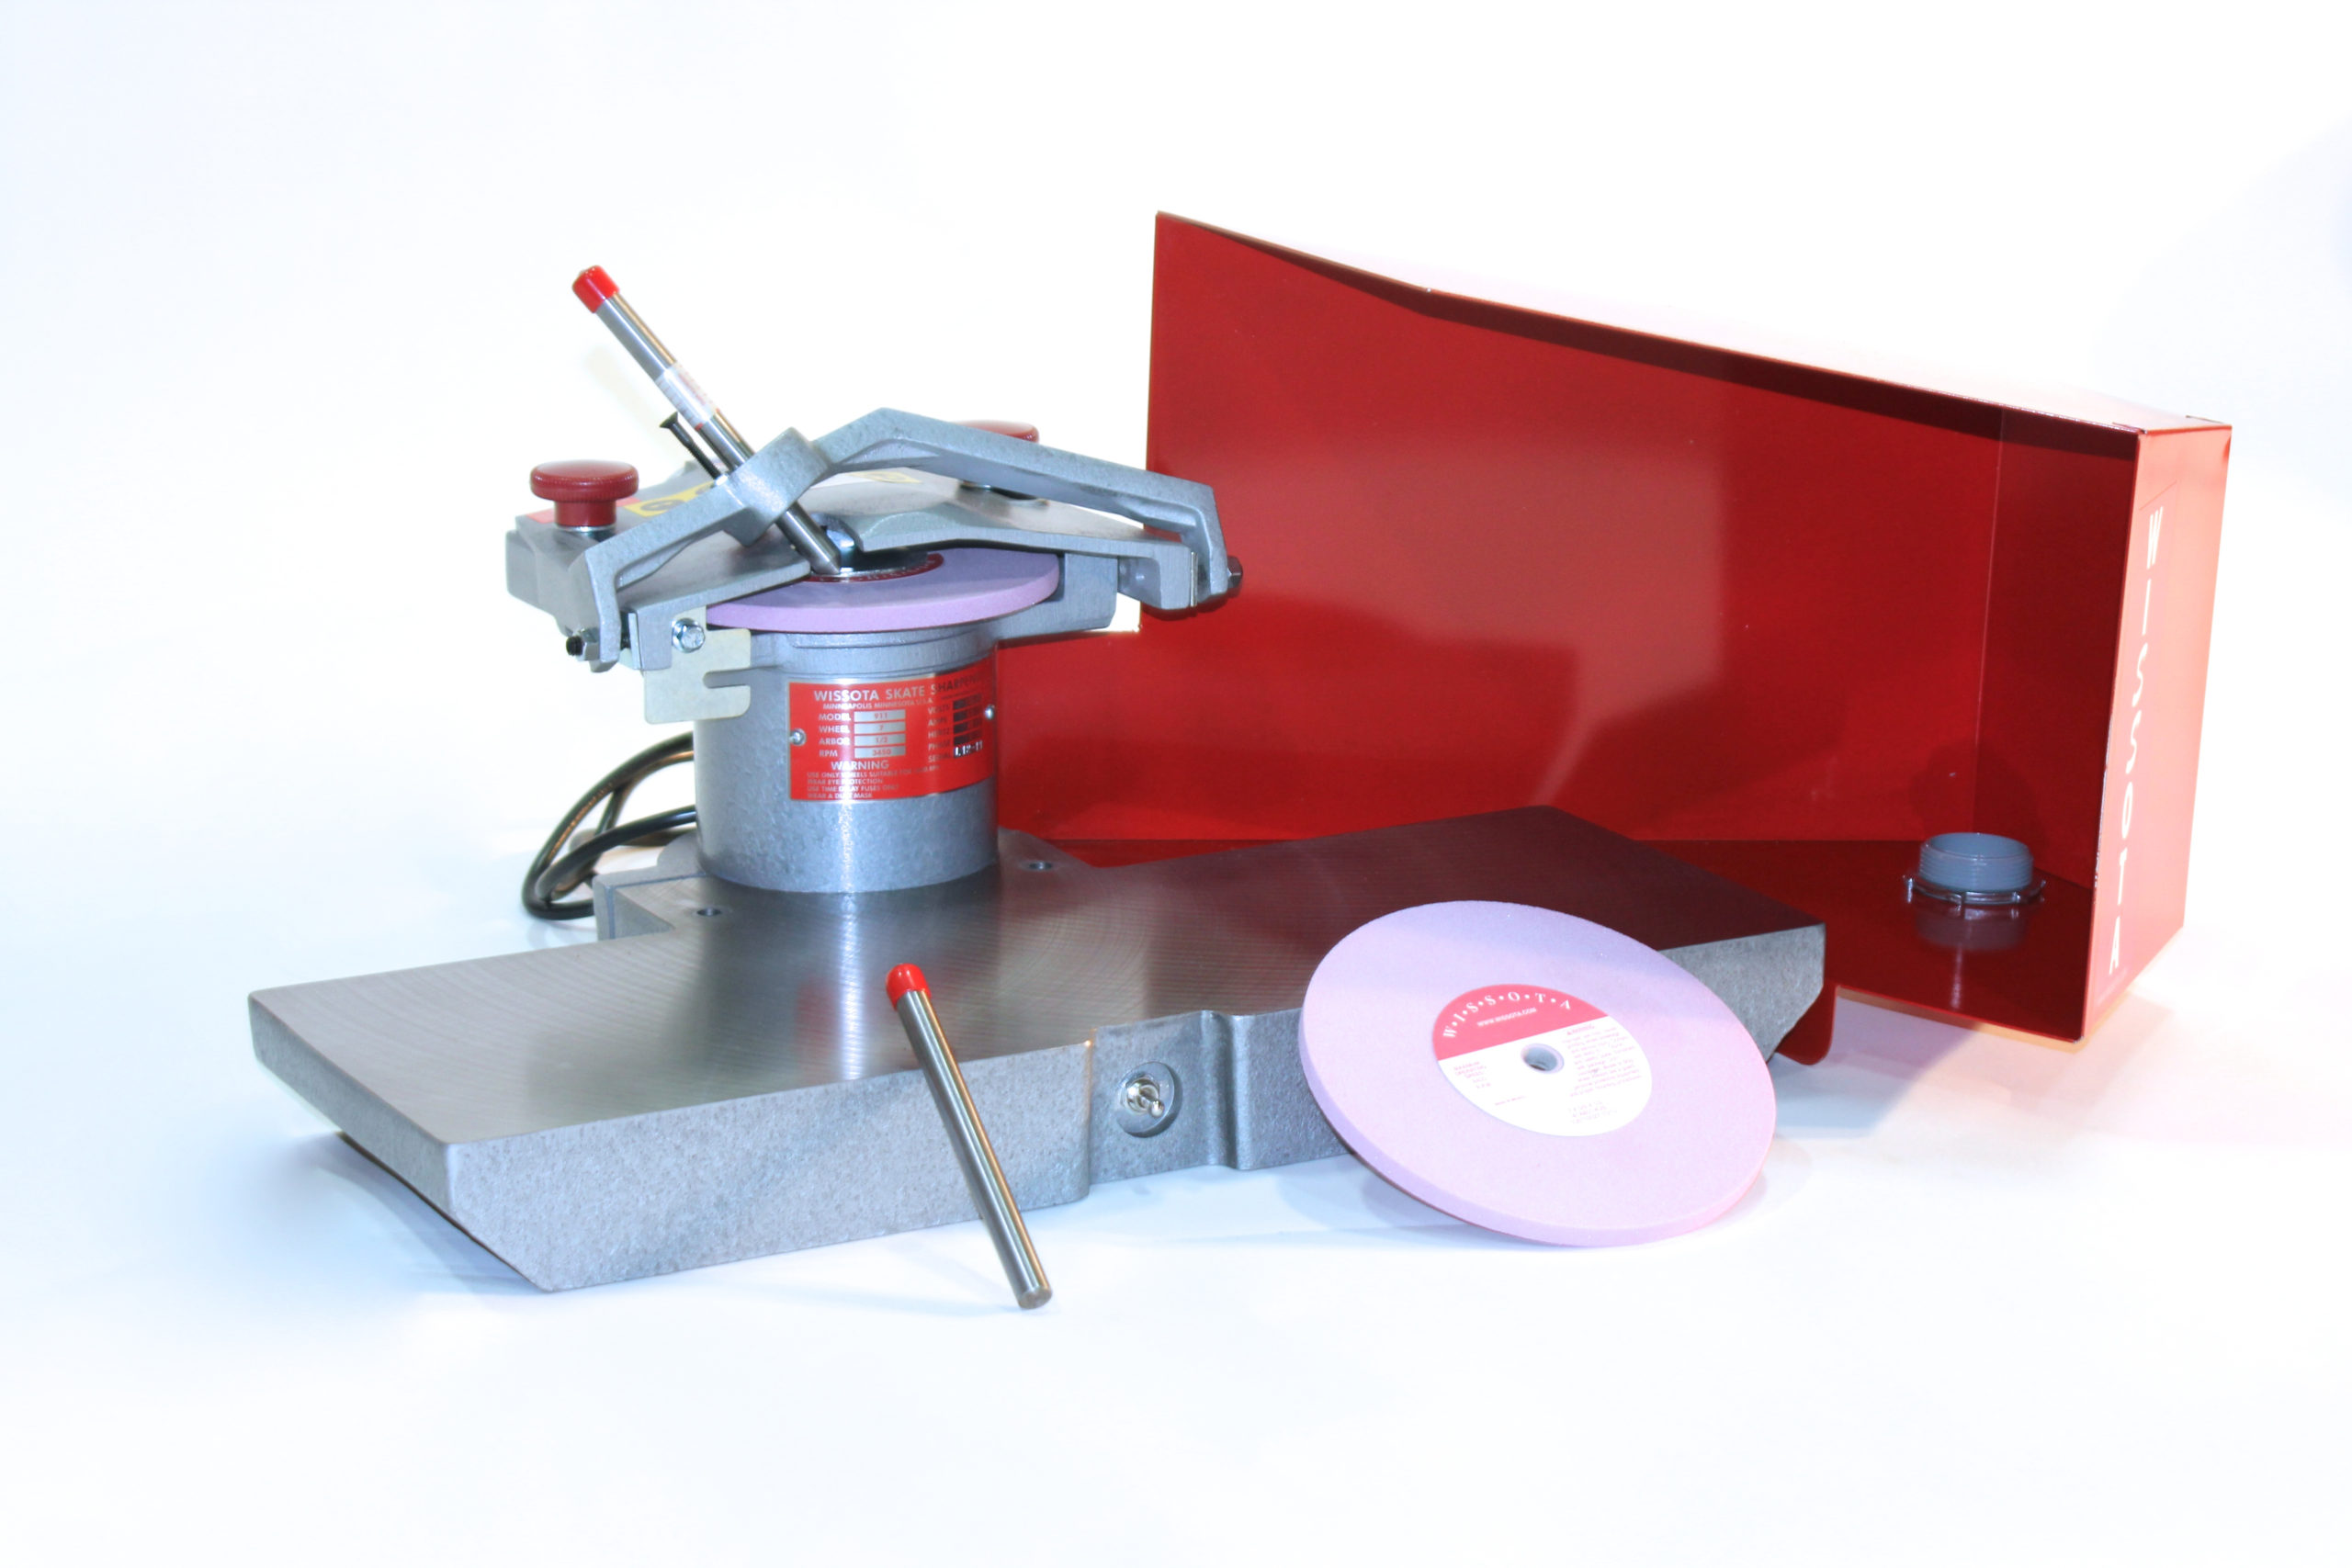 Would you buy an in-home automatic skate sharpener for $600?